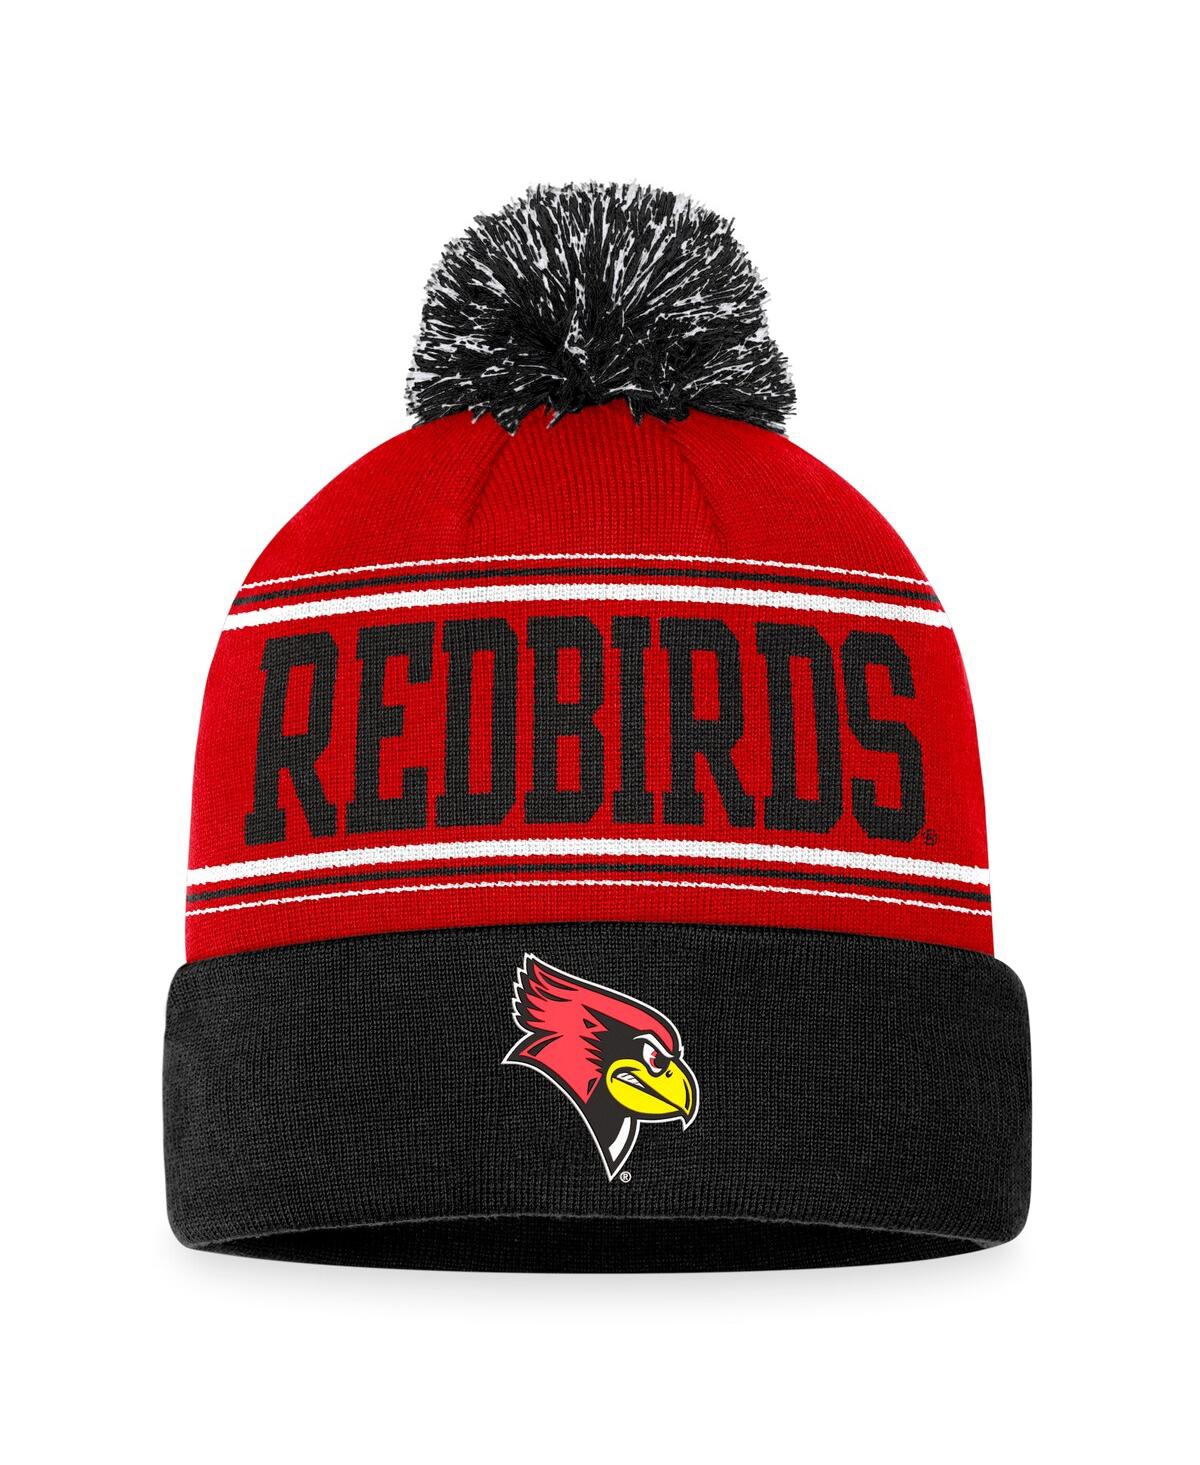 Men's Red Illinois State Redbirds Draft Cuffed Knit Hat with Pom - Red, Black